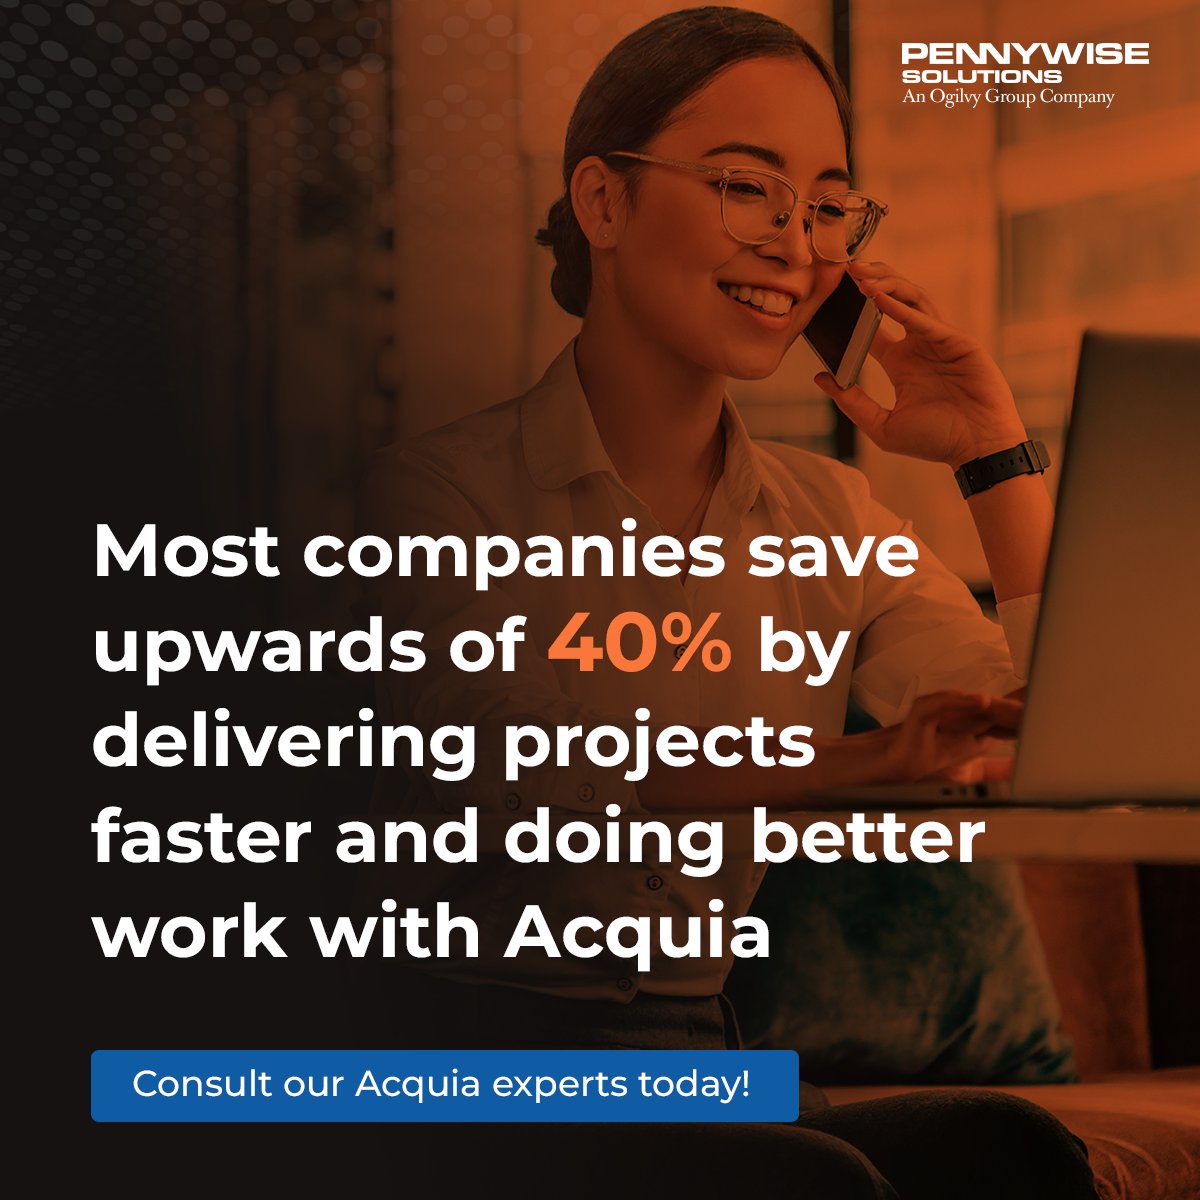 You can also achieve this with our #Acquia expertise. Request a call with our team today. Visit bit.ly/3q0RUZQ or email us at info@pennywisesolutions.com #PennyWise #OgilvyGroup #DigitalTransformation #CX #CustomerExperience #eCommerce #OnlineShopping